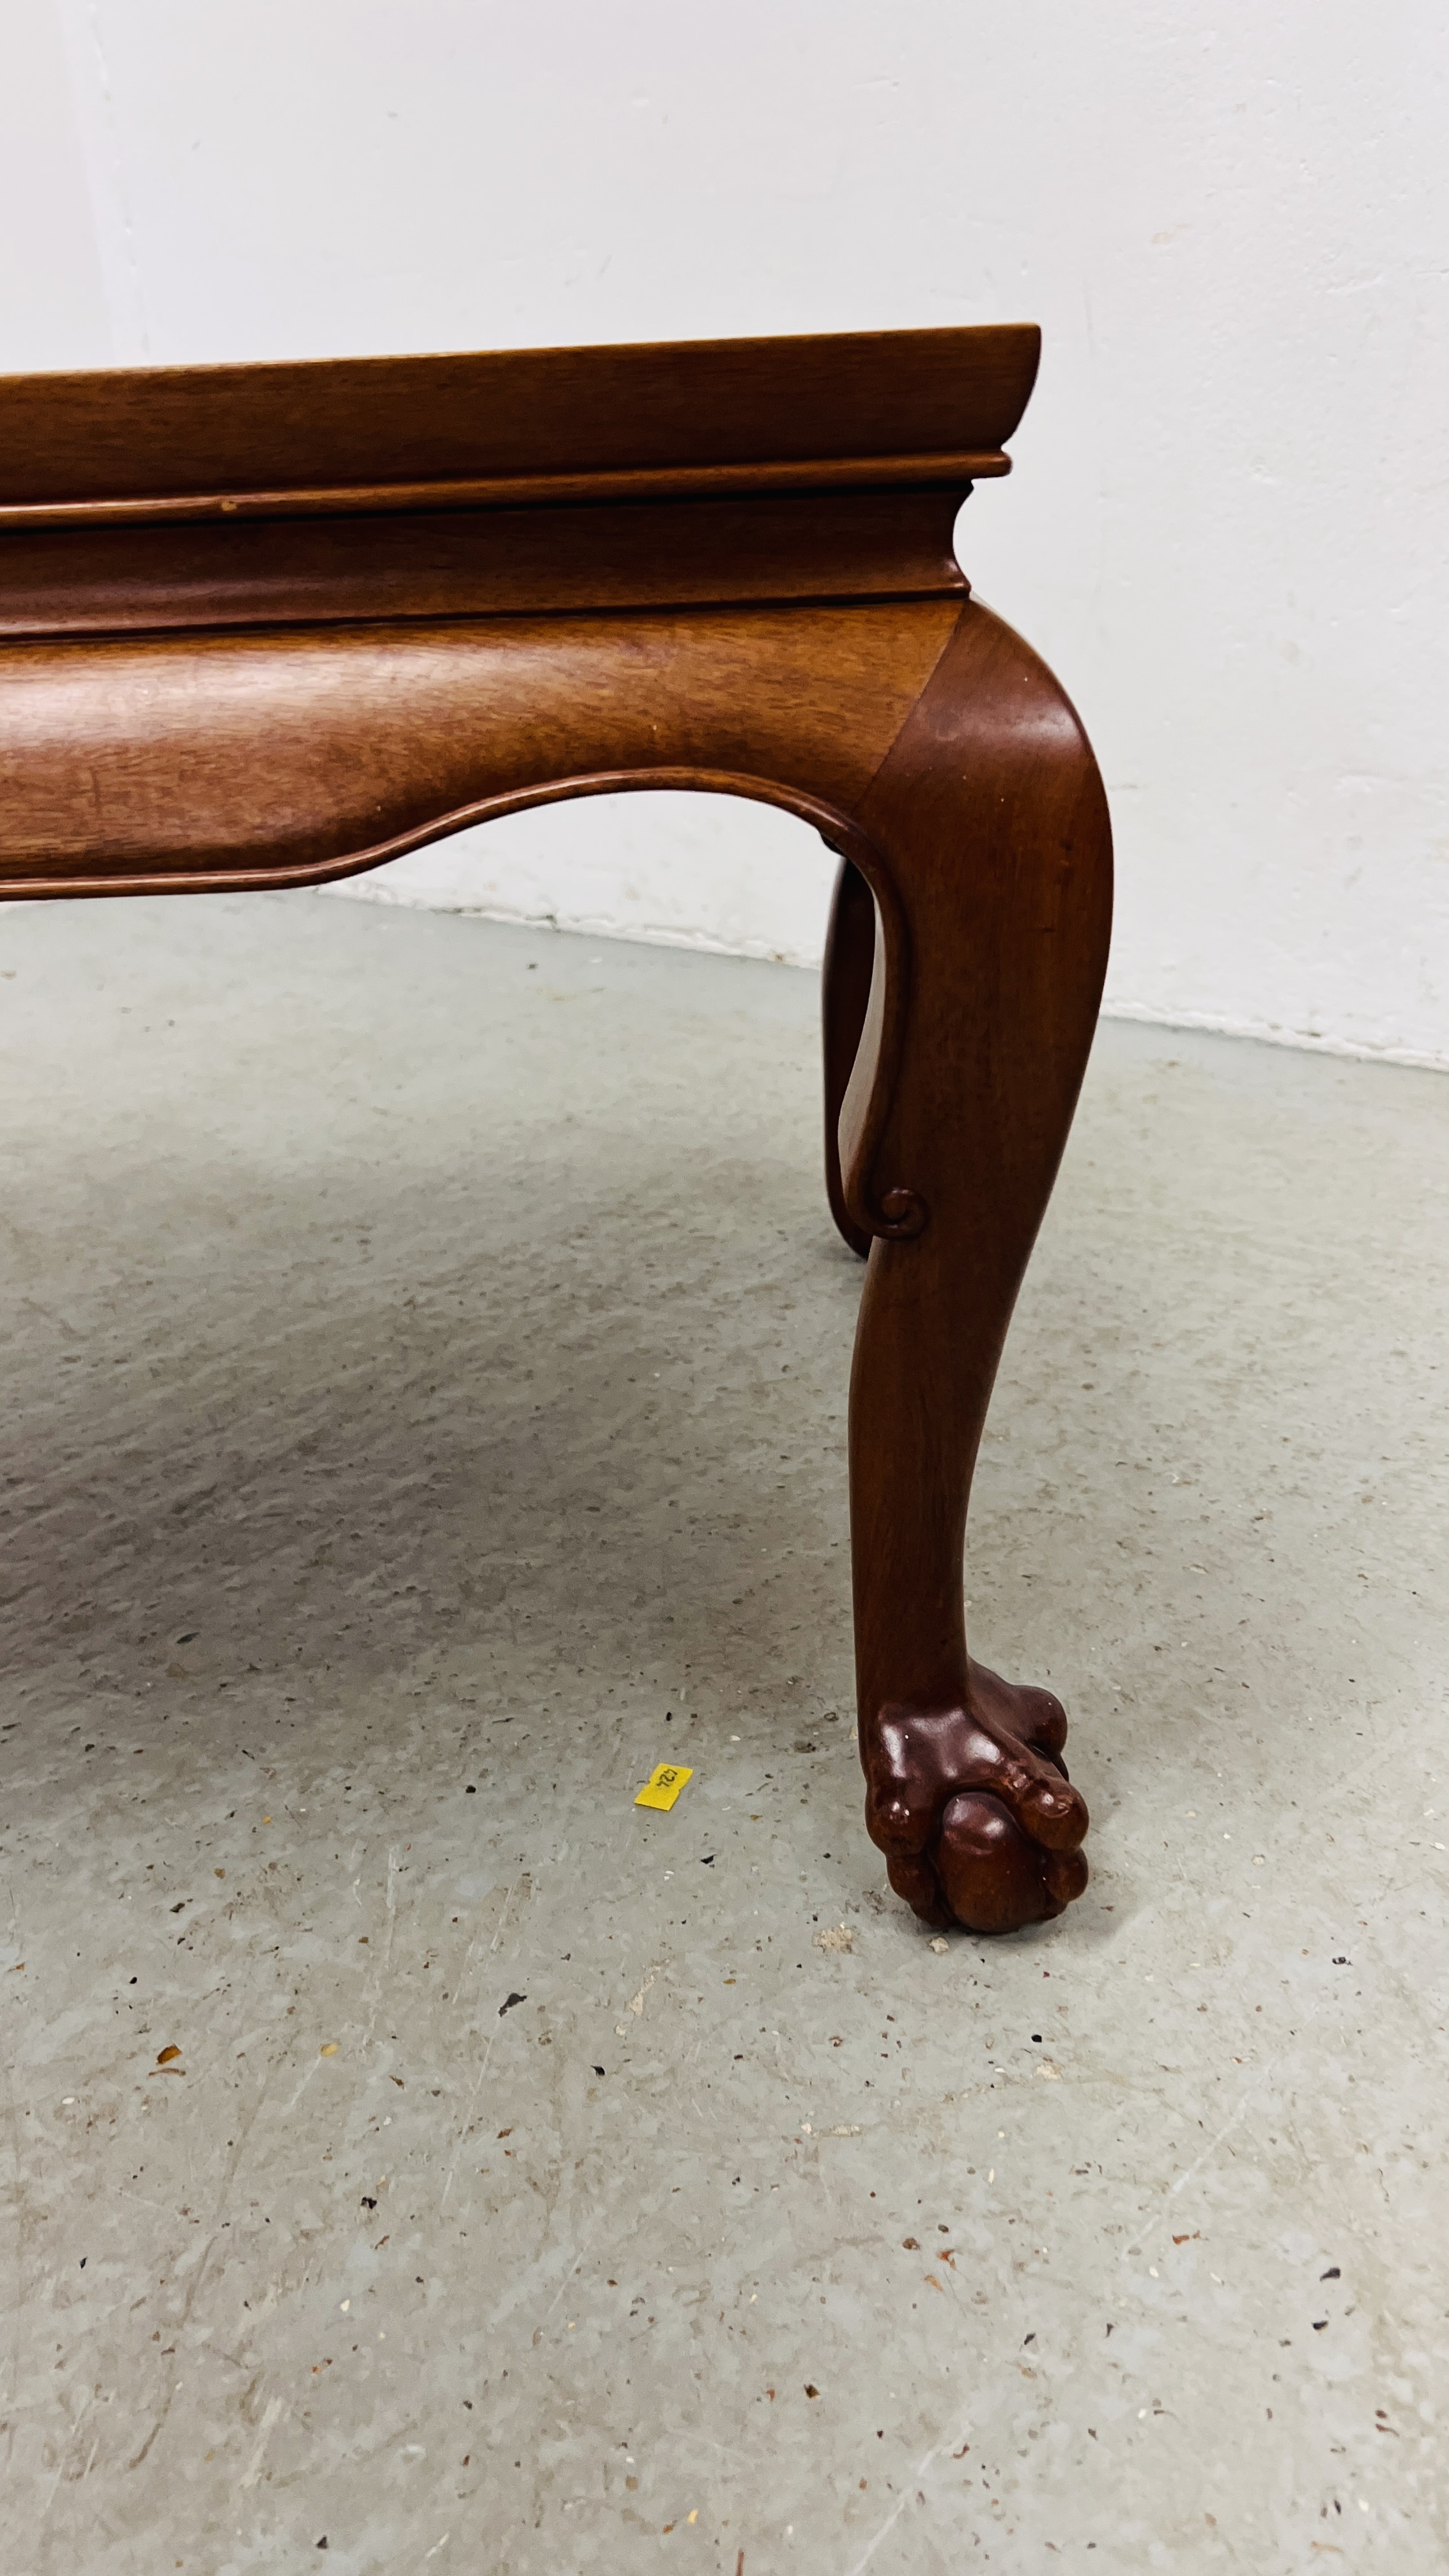 REPRODUCTION ORIENTAL HARDWOOD TABLE ON BALL AND CLAW FEET L 122CM, D 51CM, H 41CM. - Image 3 of 6